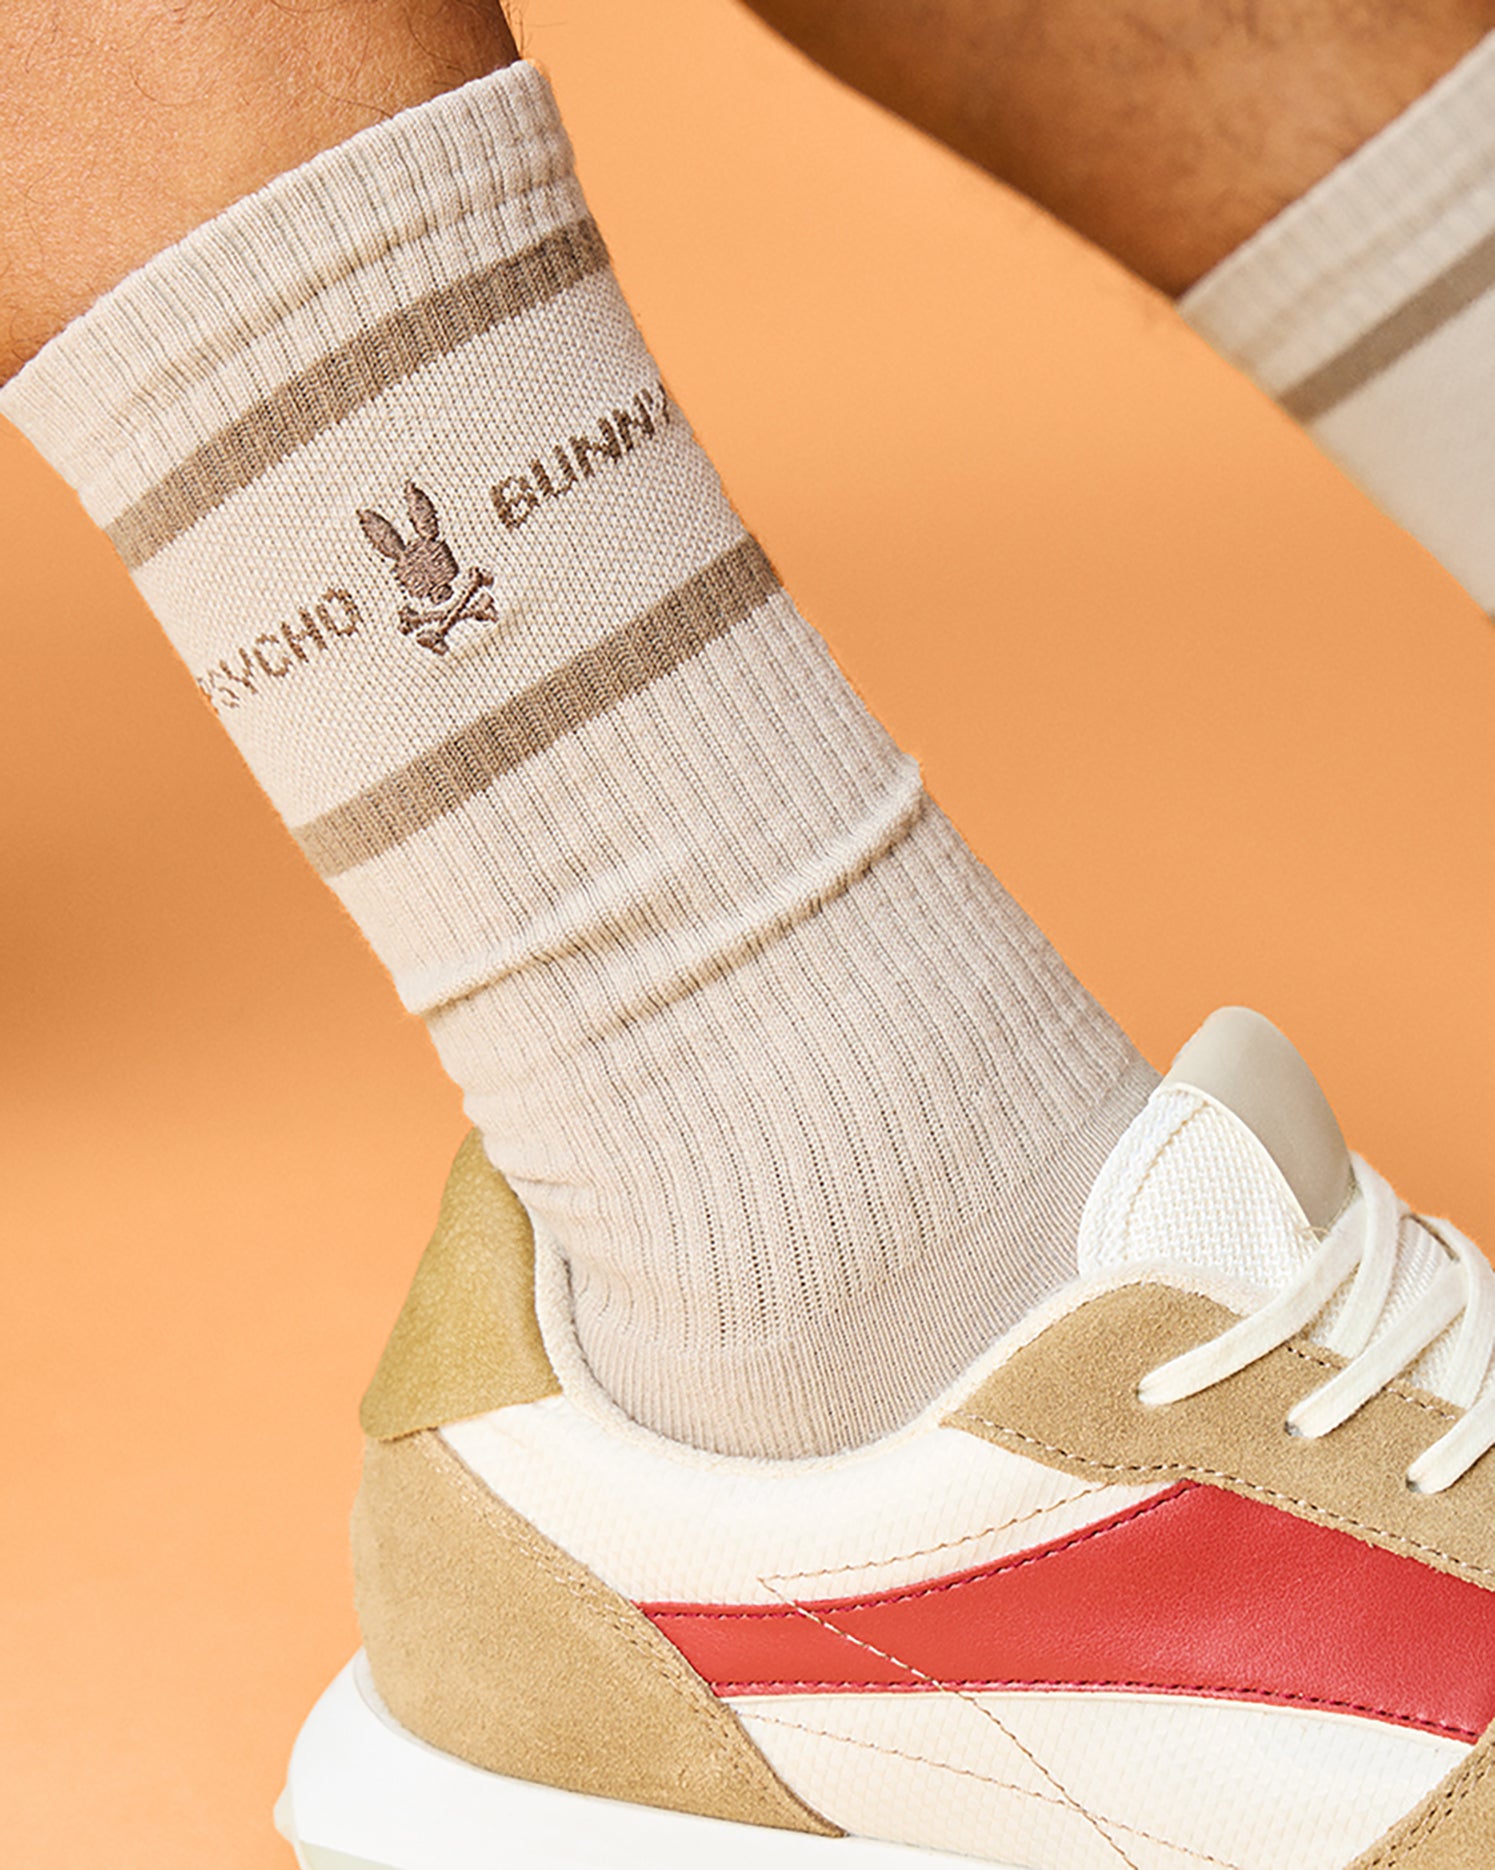 Close-up of a person's foot wearing a beige, Pima cotton-blend sock with an embroidered cartoon bunny logo and the text 